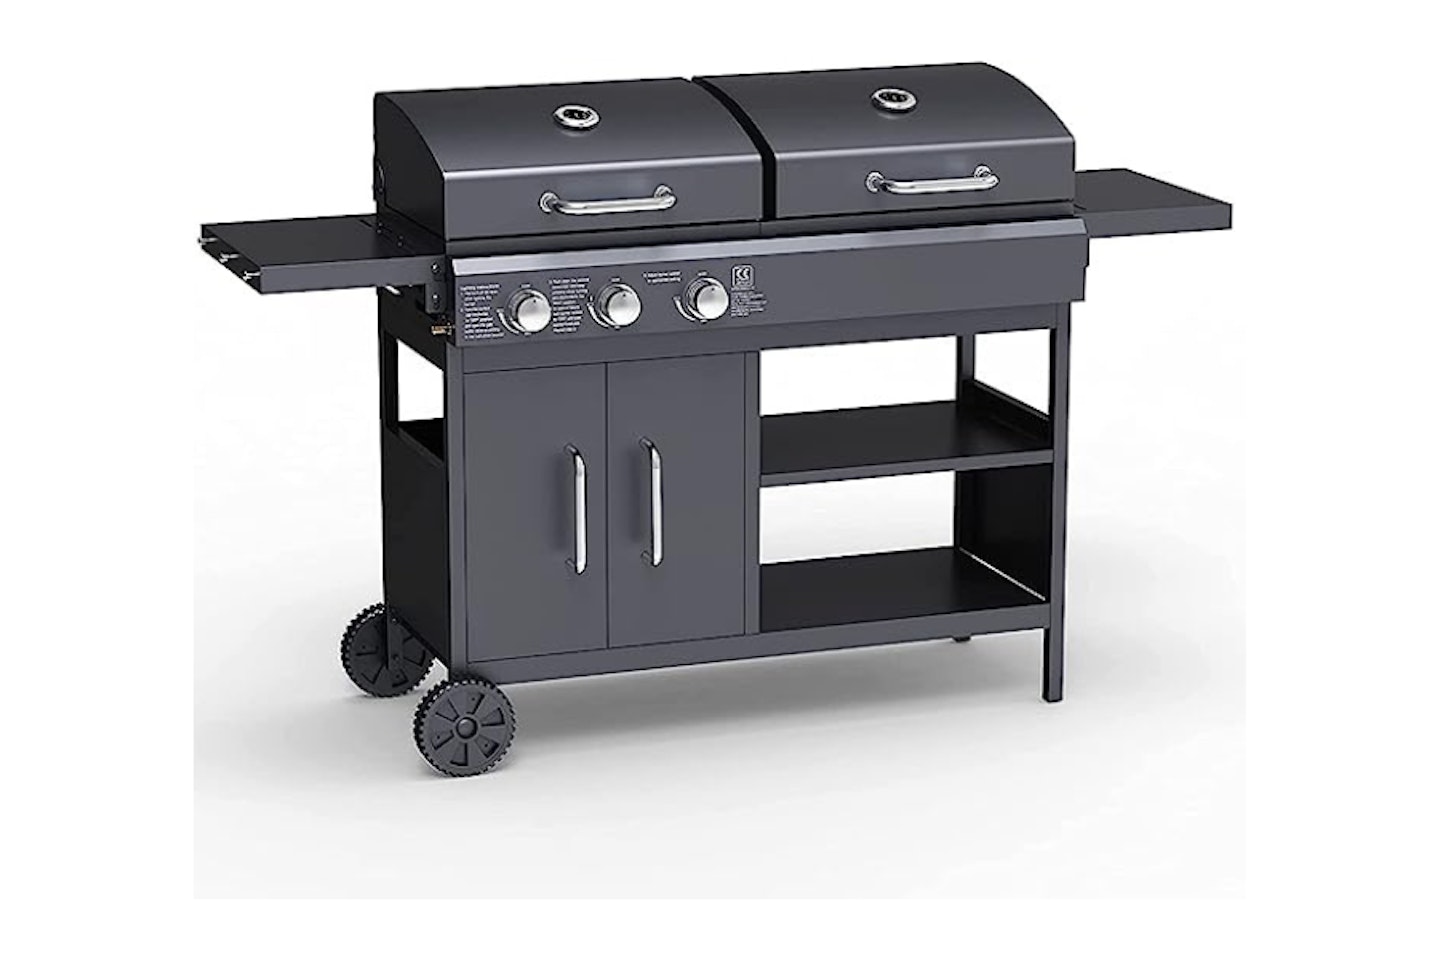 BillyOh Gas BBQ Grill and Charcoal BBQ Smoker